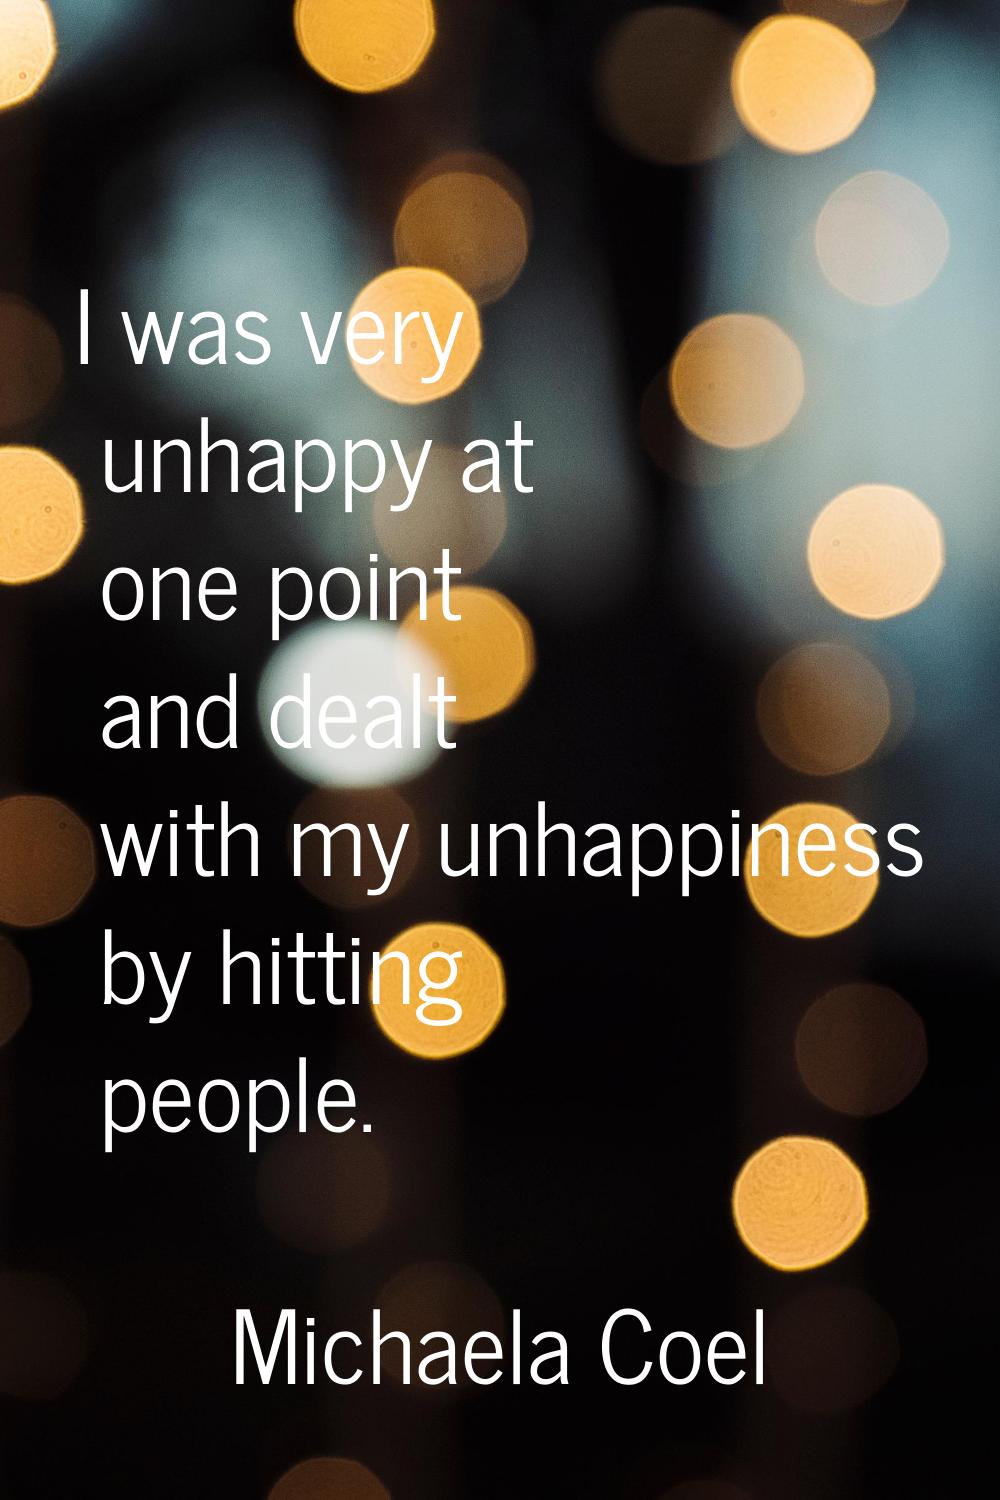 I was very unhappy at one point and dealt with my unhappiness by hitting people.